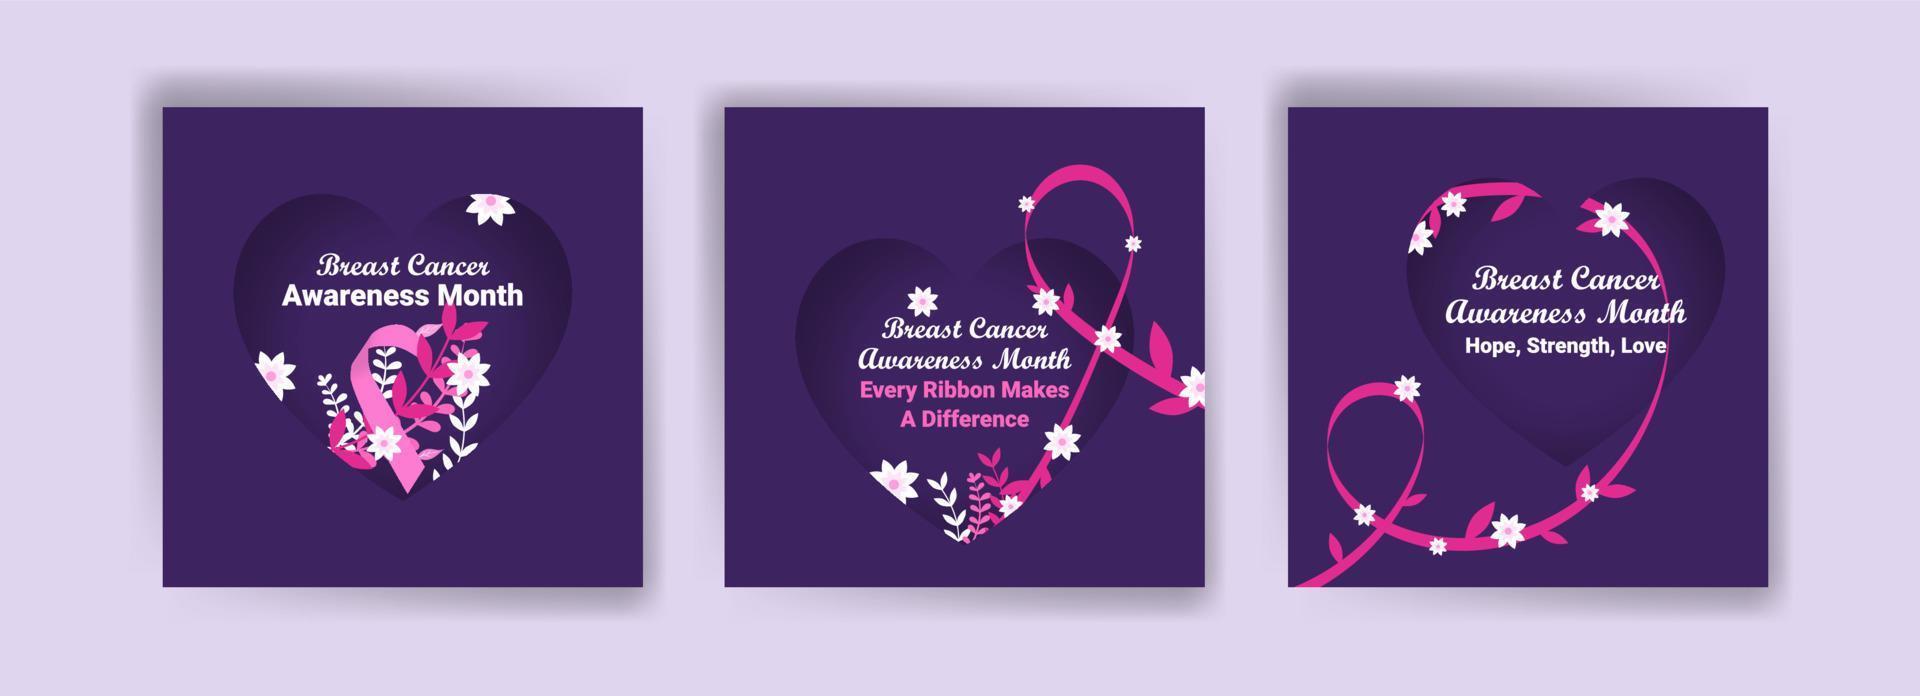 Social media post template for breast cancer awareness. Women's healthcare. Celebrate annual. Medic concept. vector